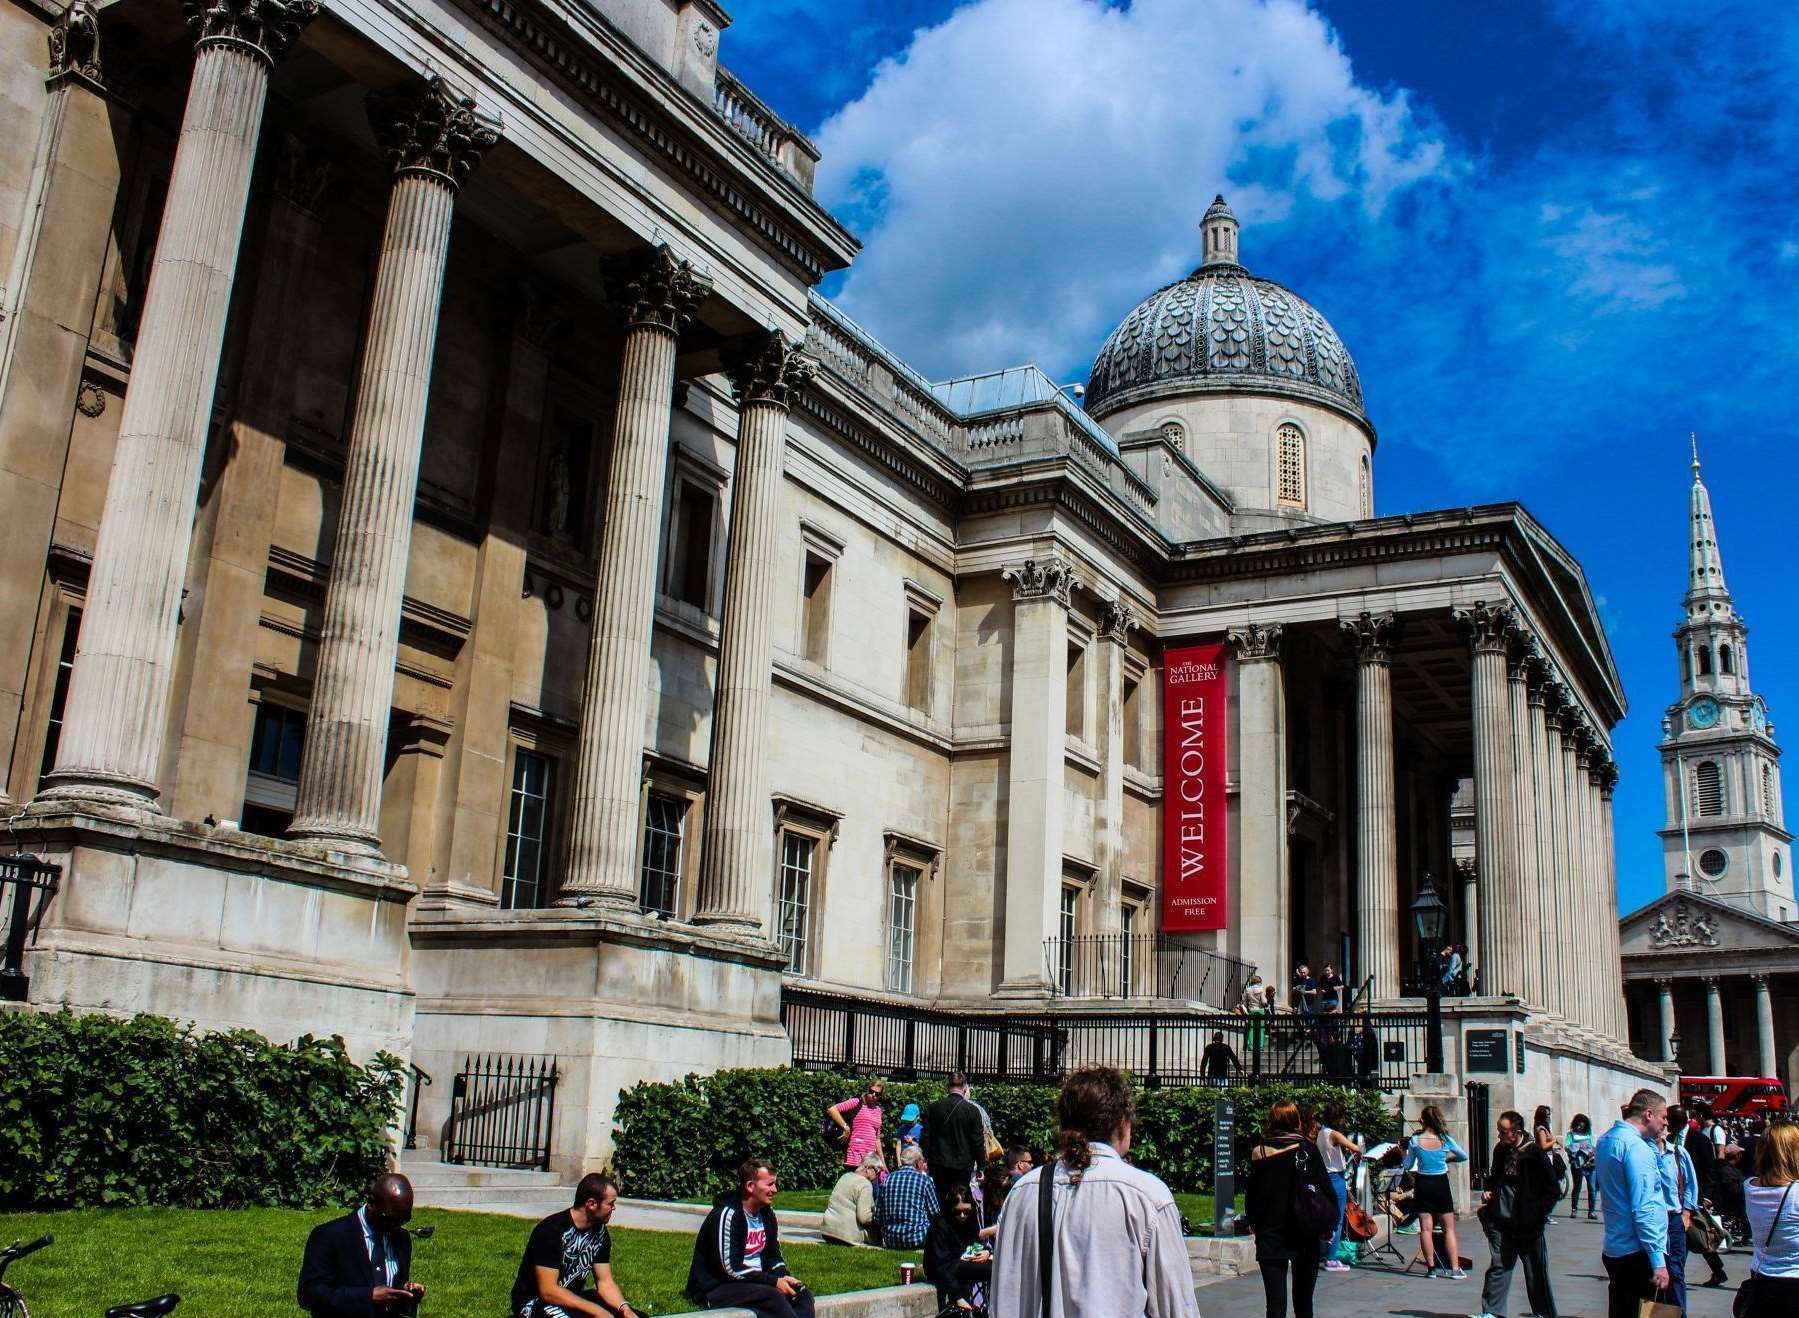 The National Gallery houses one of the greatest collections of paintings in the world